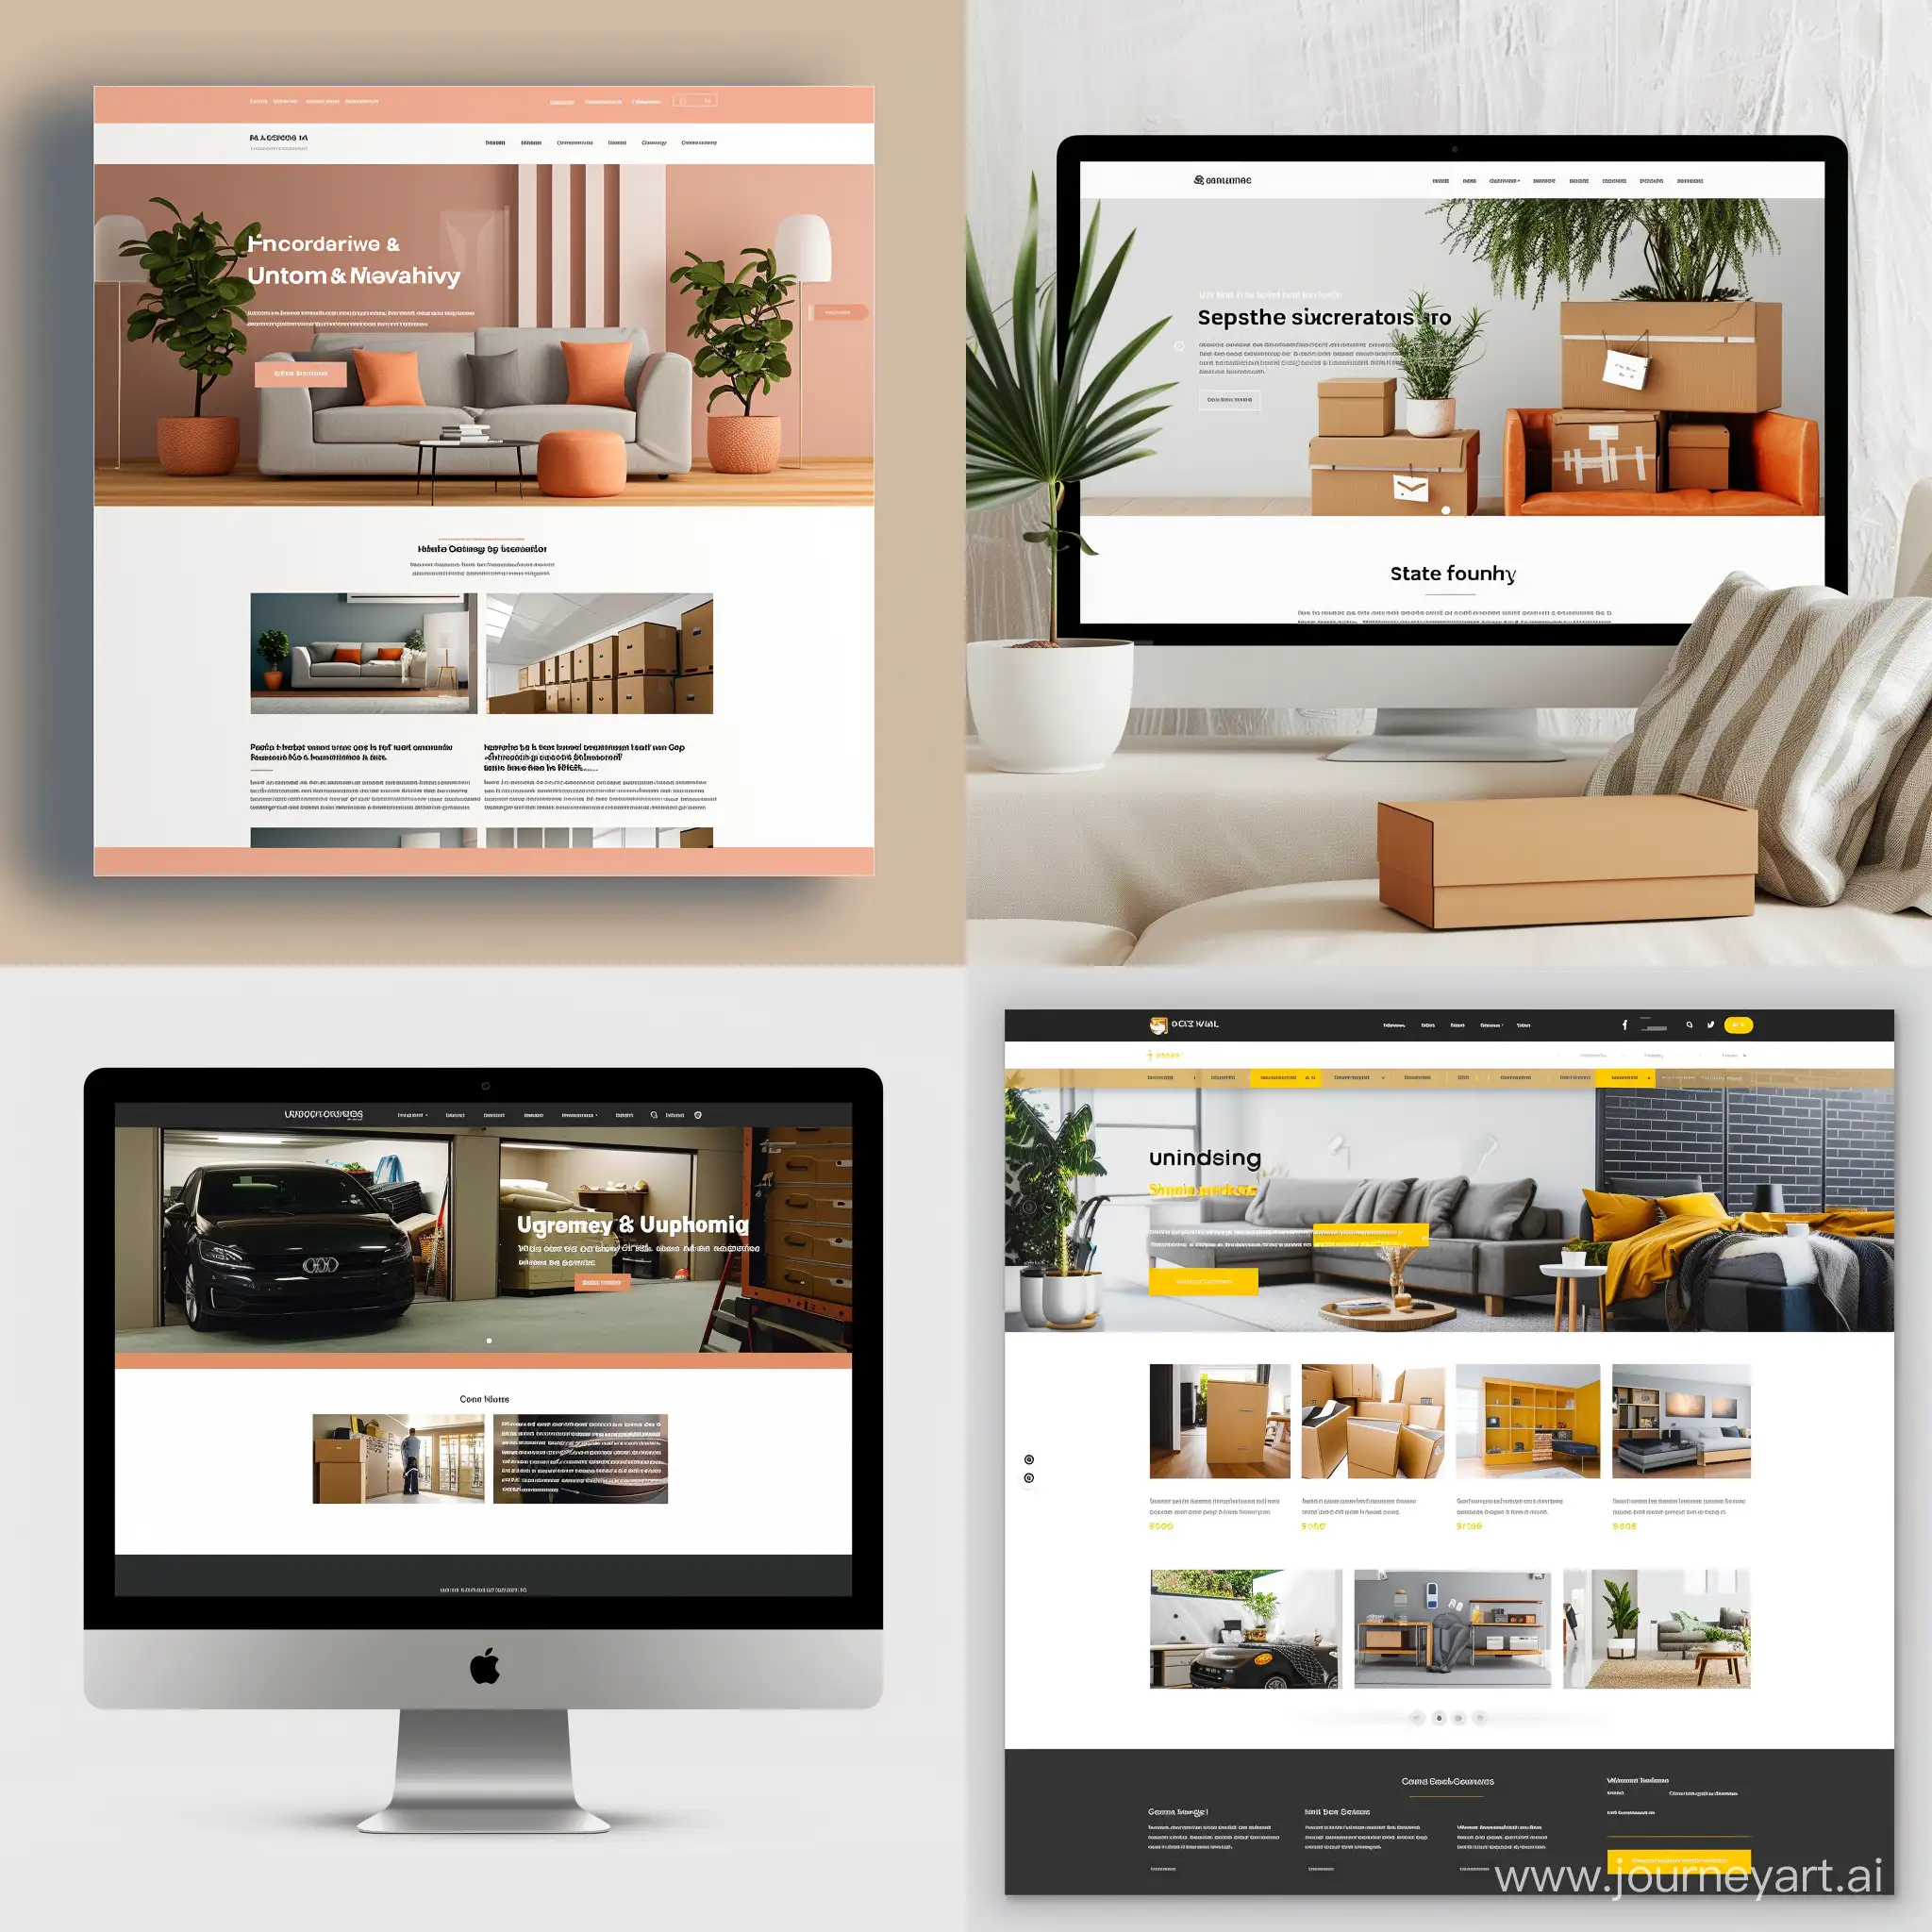  a beautiful website for a company that do home, garages, storages packing&unpacking&organizing, ui, ux, ui/ux, website